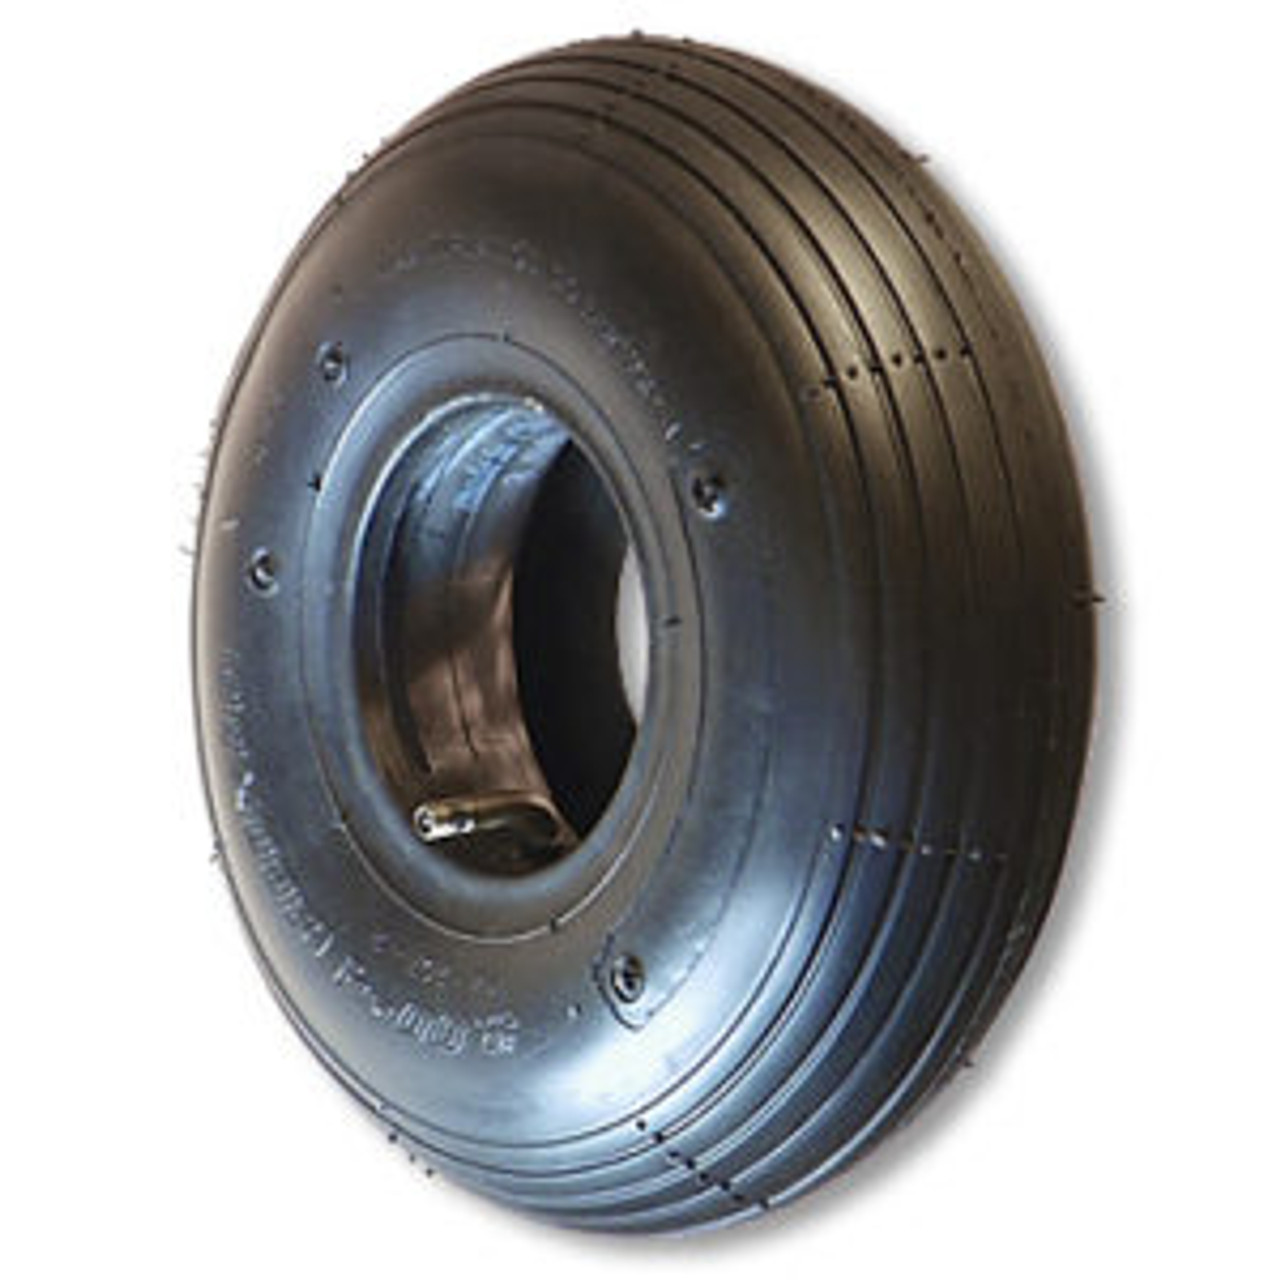 13-400 X 6 Ribbed Tire, 2 Ply, 4.1" Wide, 13.0" OD, Round Profile